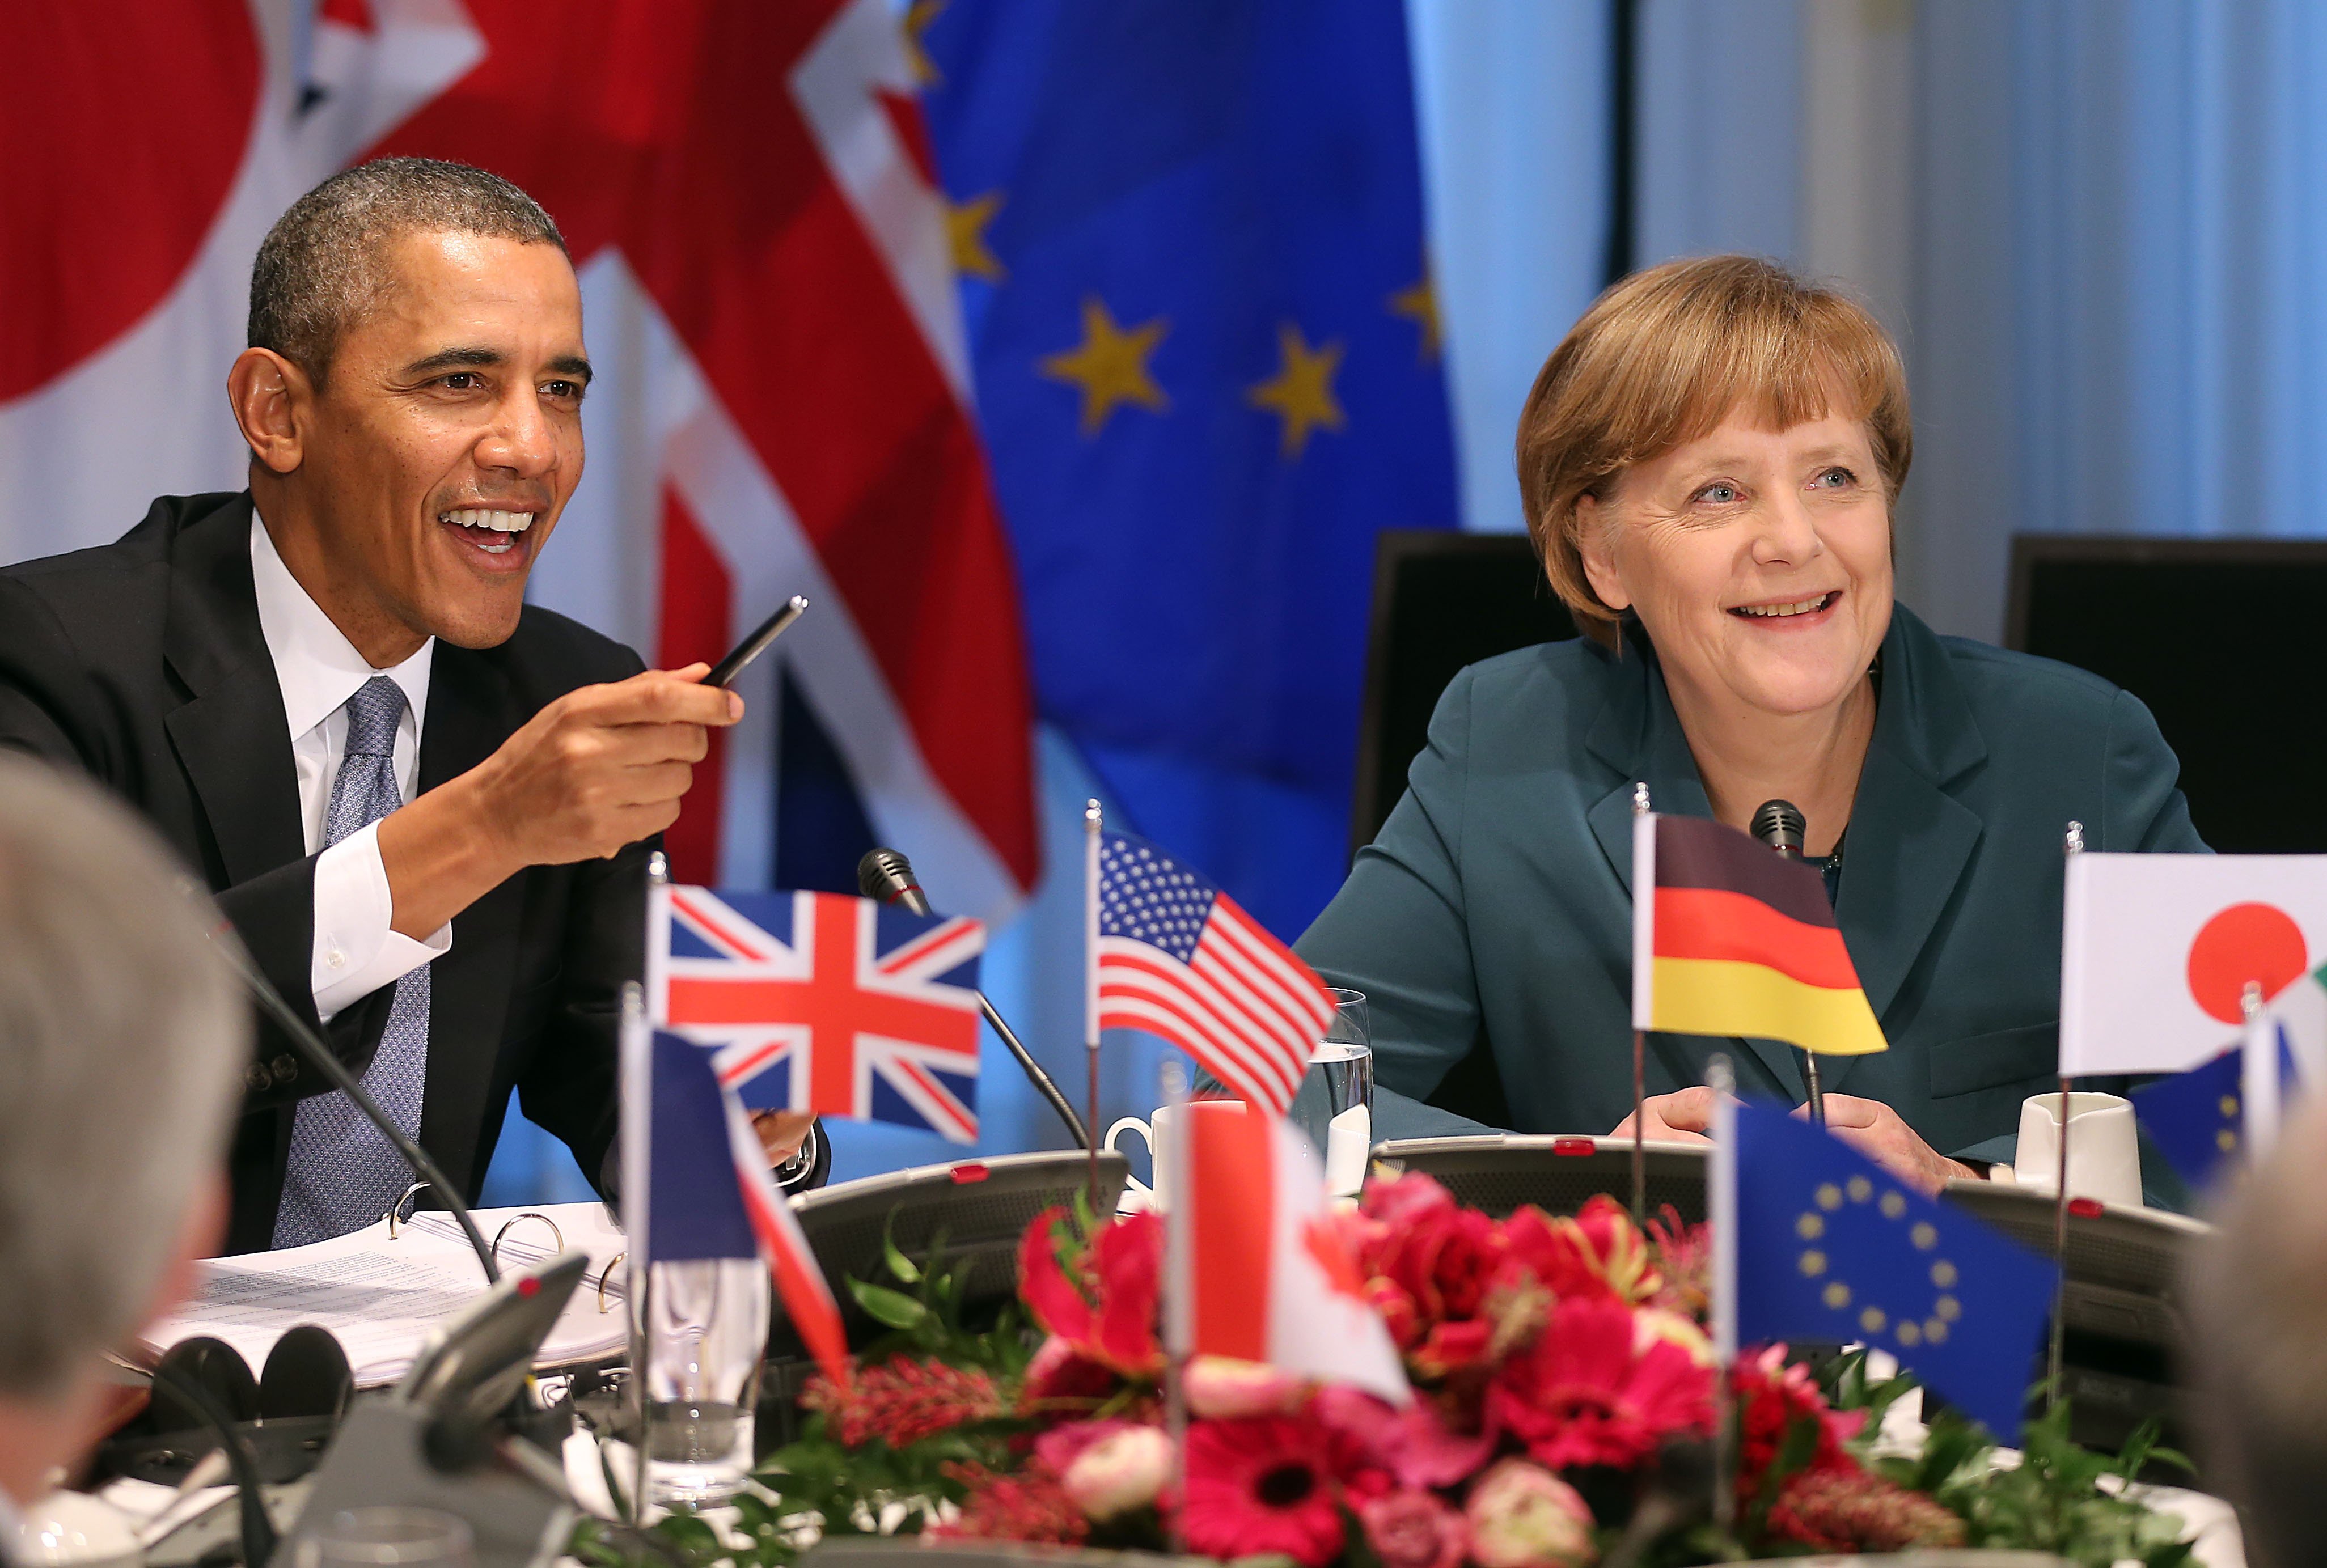 President Barack Obama and Chancellor Angela Merkel at a meeting of the G-7 in the Hague on March 24, 2014 (Oliver Berg—DPA/Zumapress)